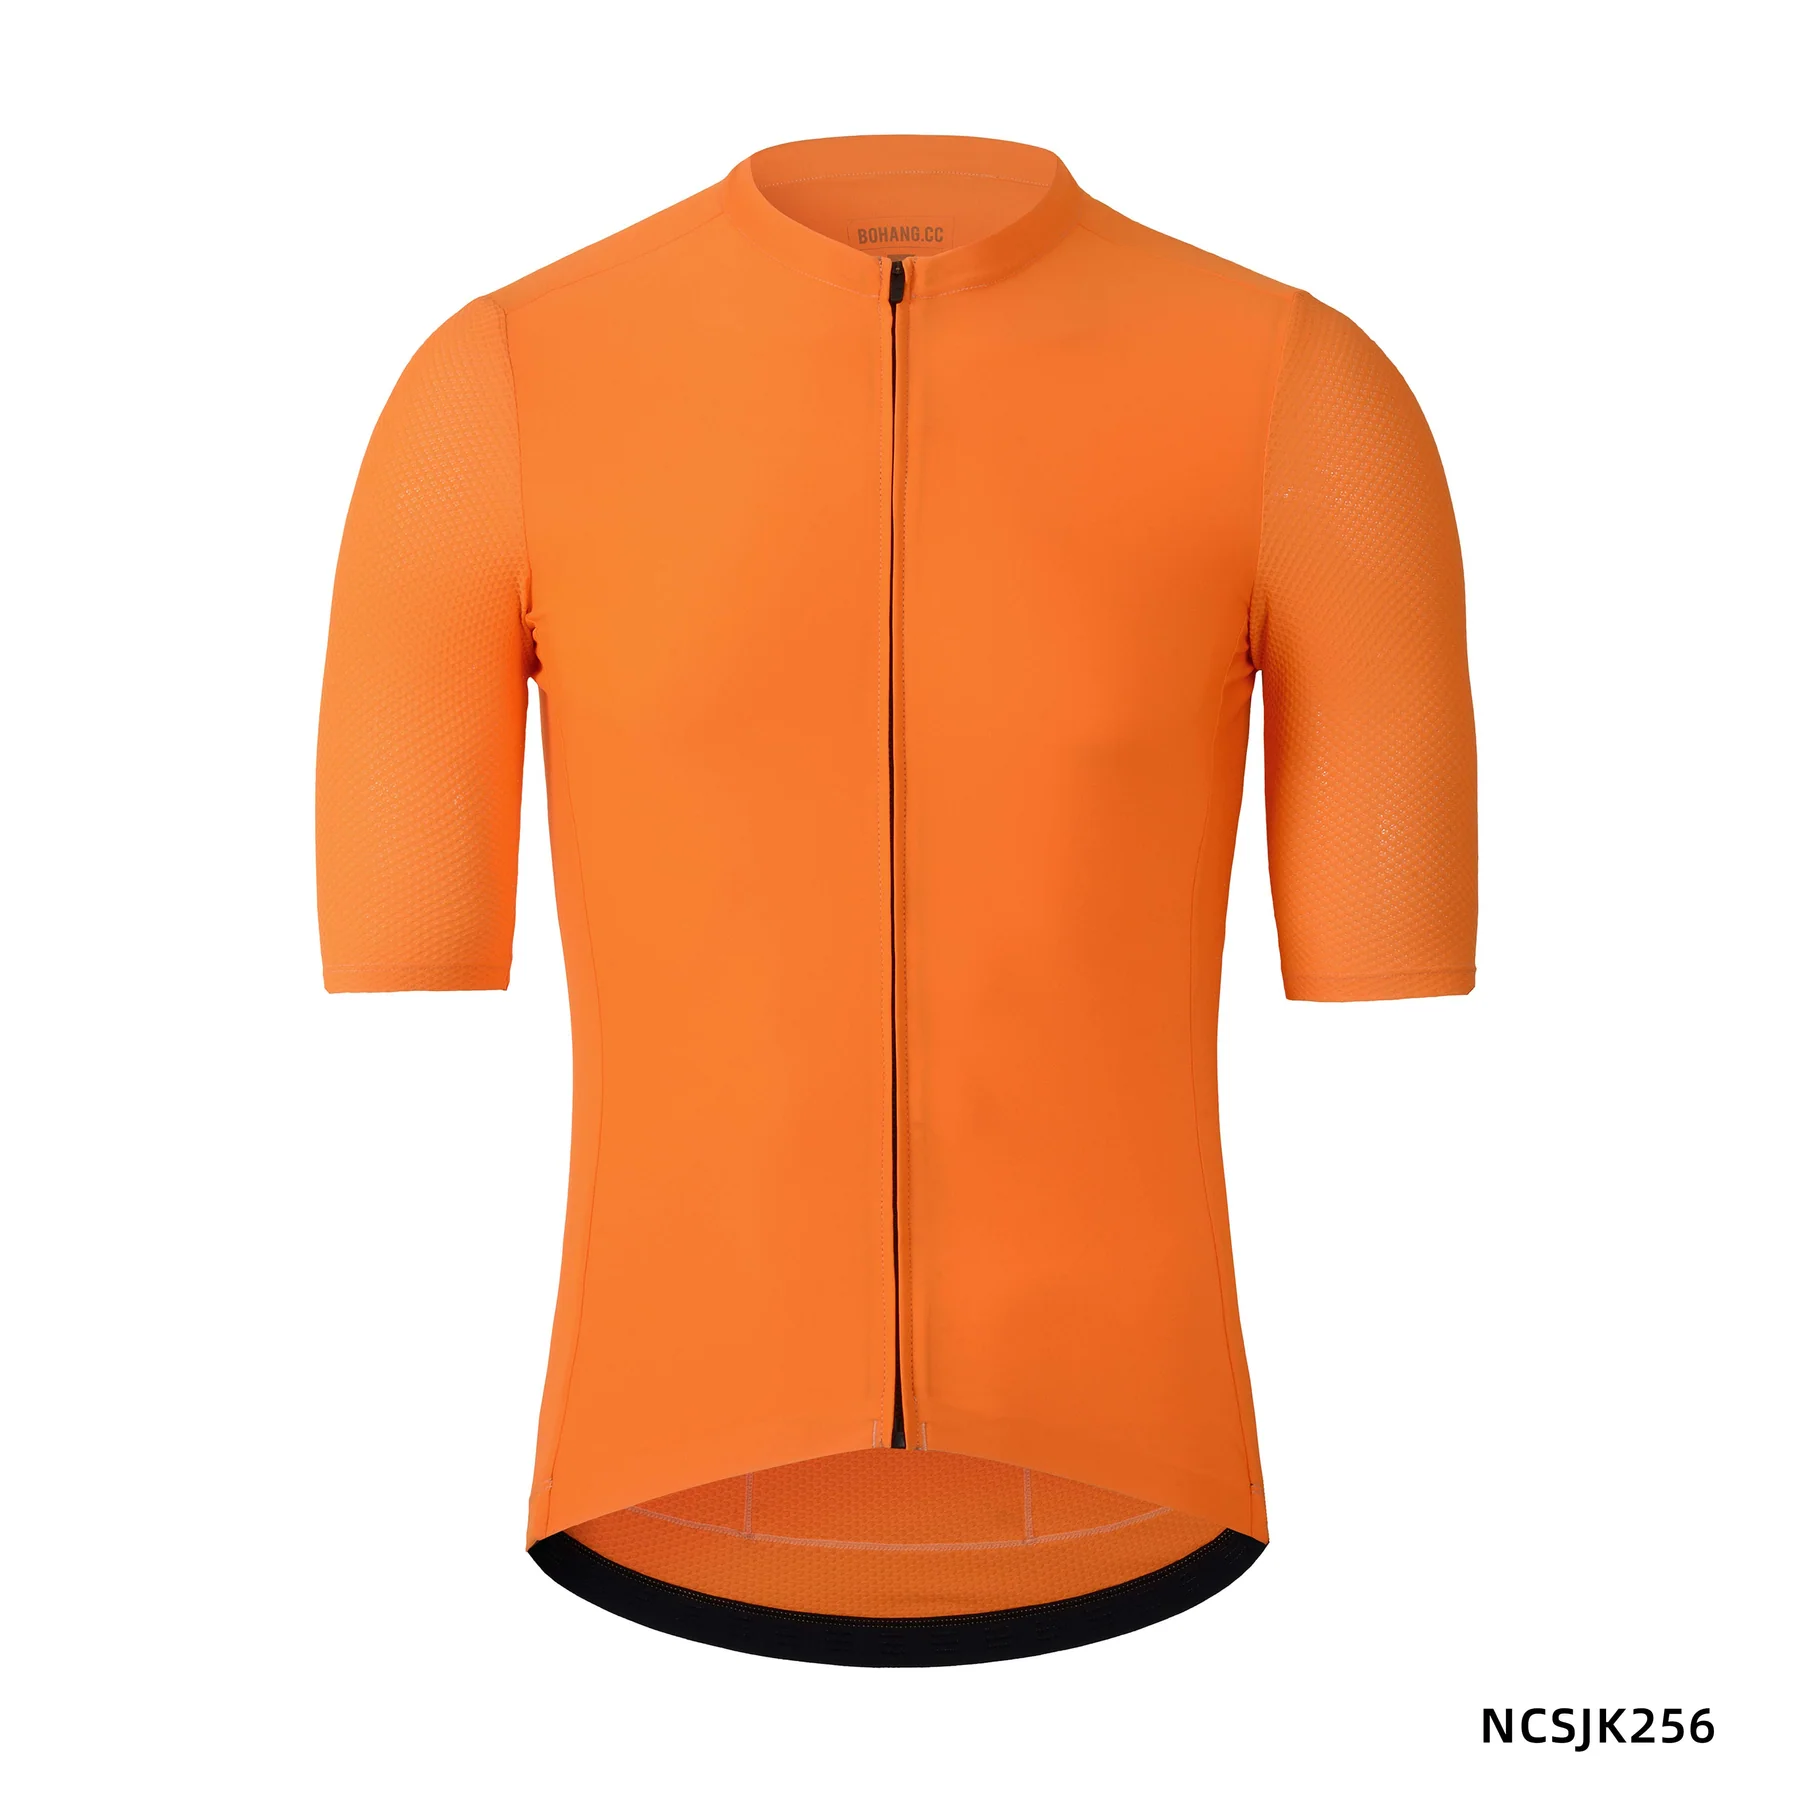 The most popular items in Men's Cycling Jerseys NCSJK256